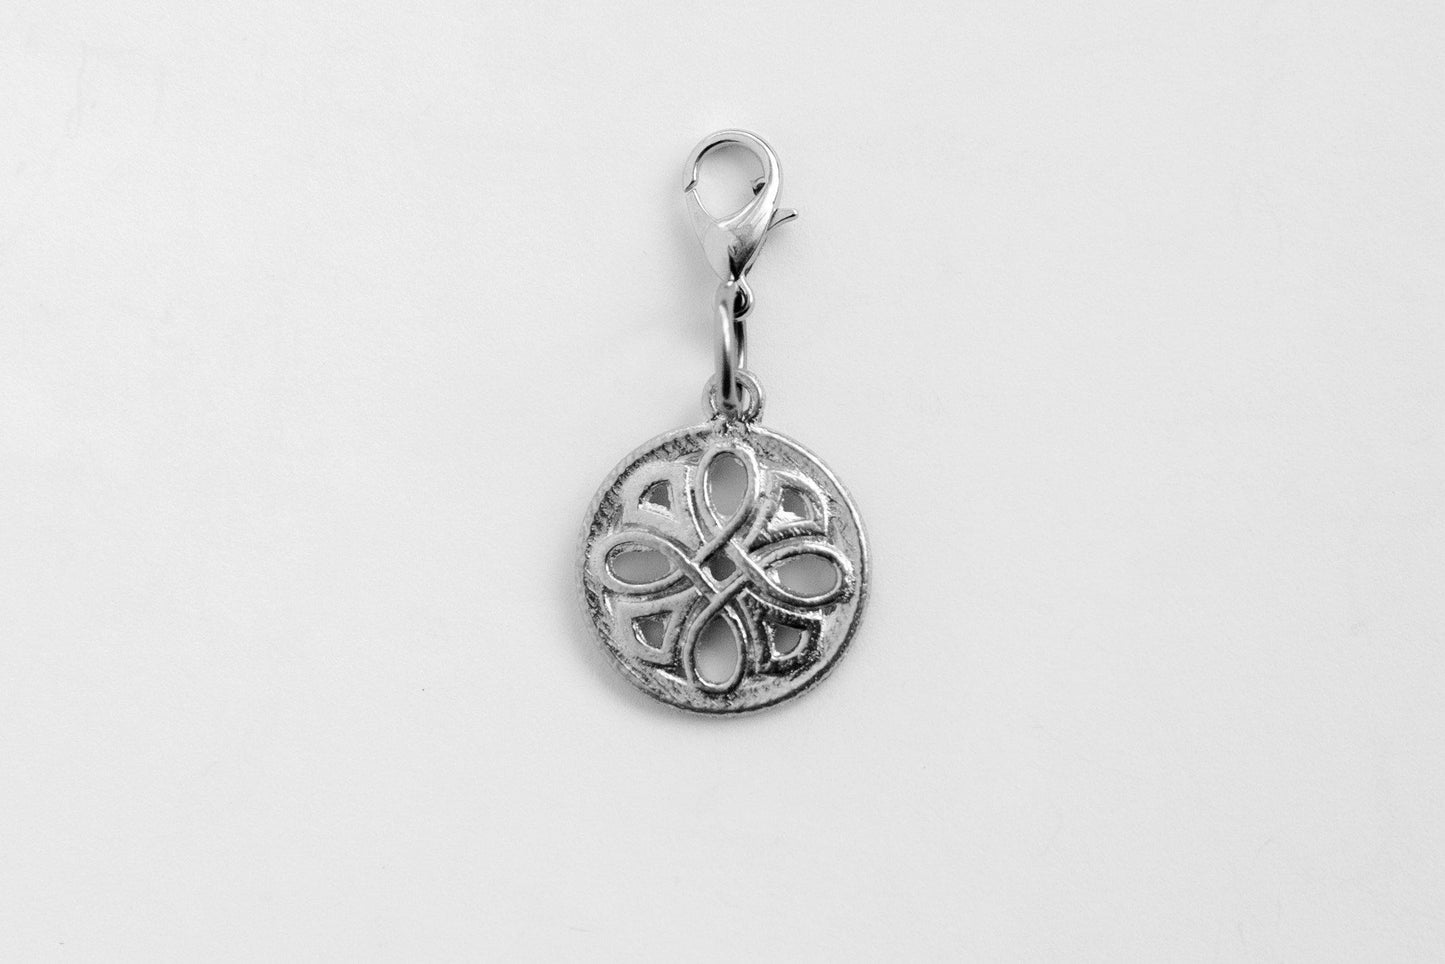 USA Handcrafted Personalized Irish Celtic Theme Knitter Stitch Marker, Maker Gift - House of Morgan Pewter